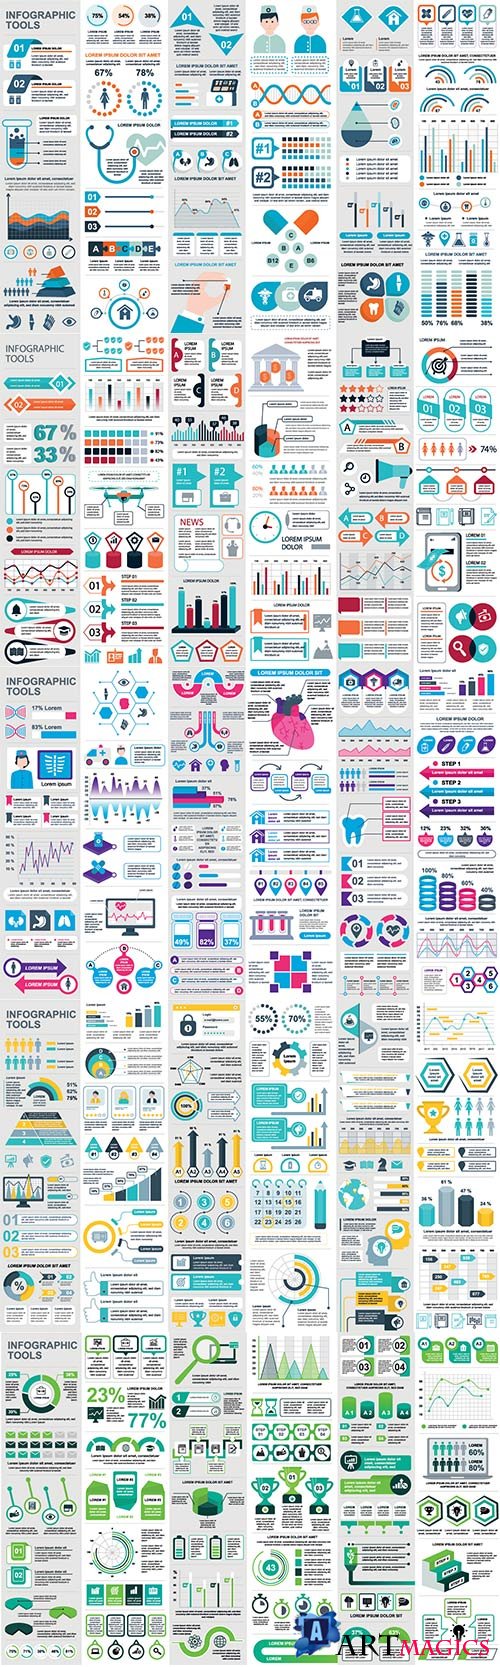 Infographic elements data visualization vector # 3